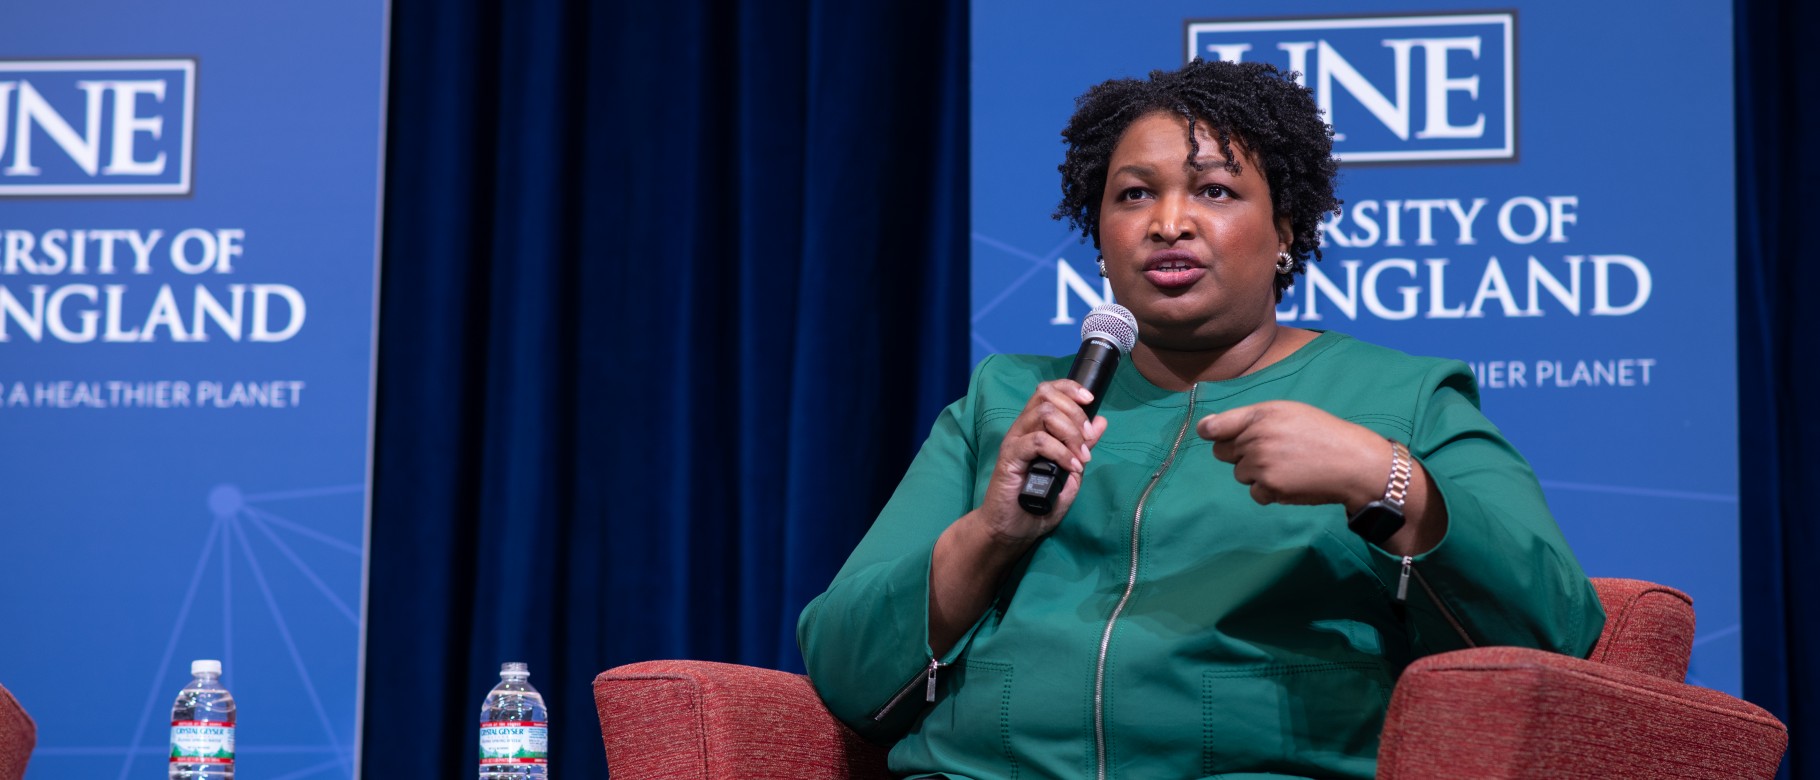 Stacey Abrams seated on stage